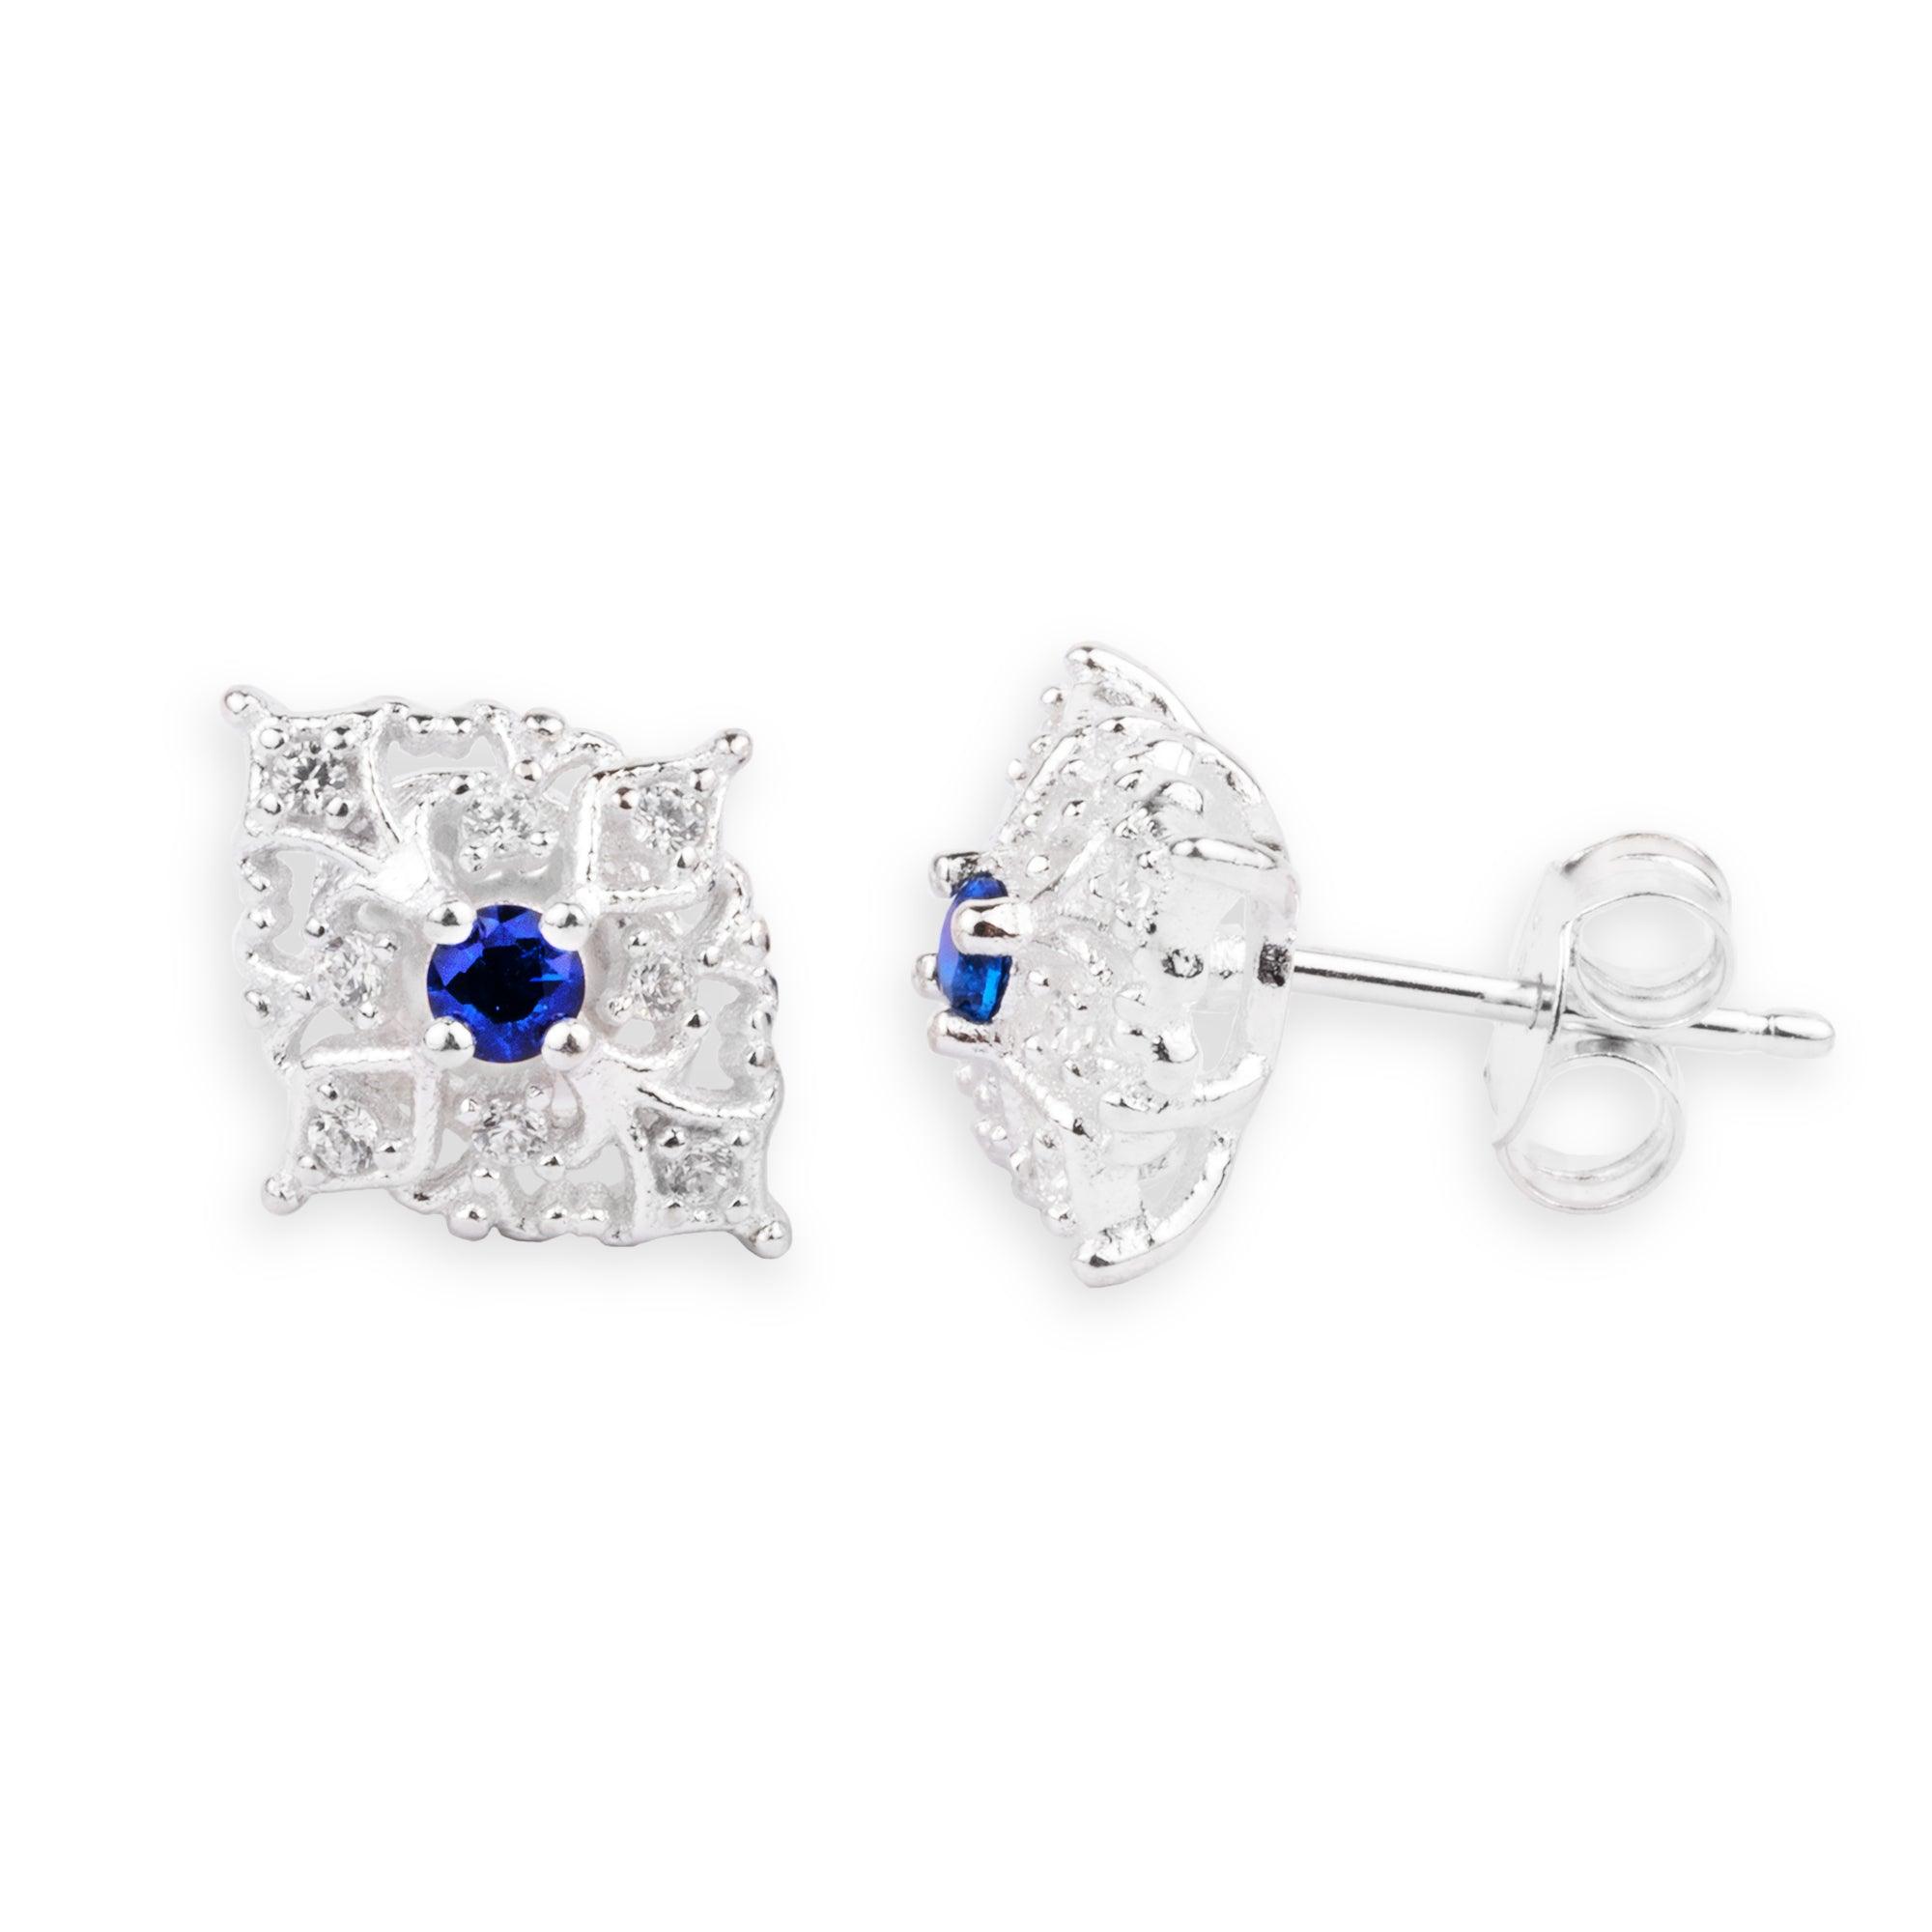 Sterling Silver Cubic Zirconia and Sapphire Earrings SE311C - Minar Jewellers